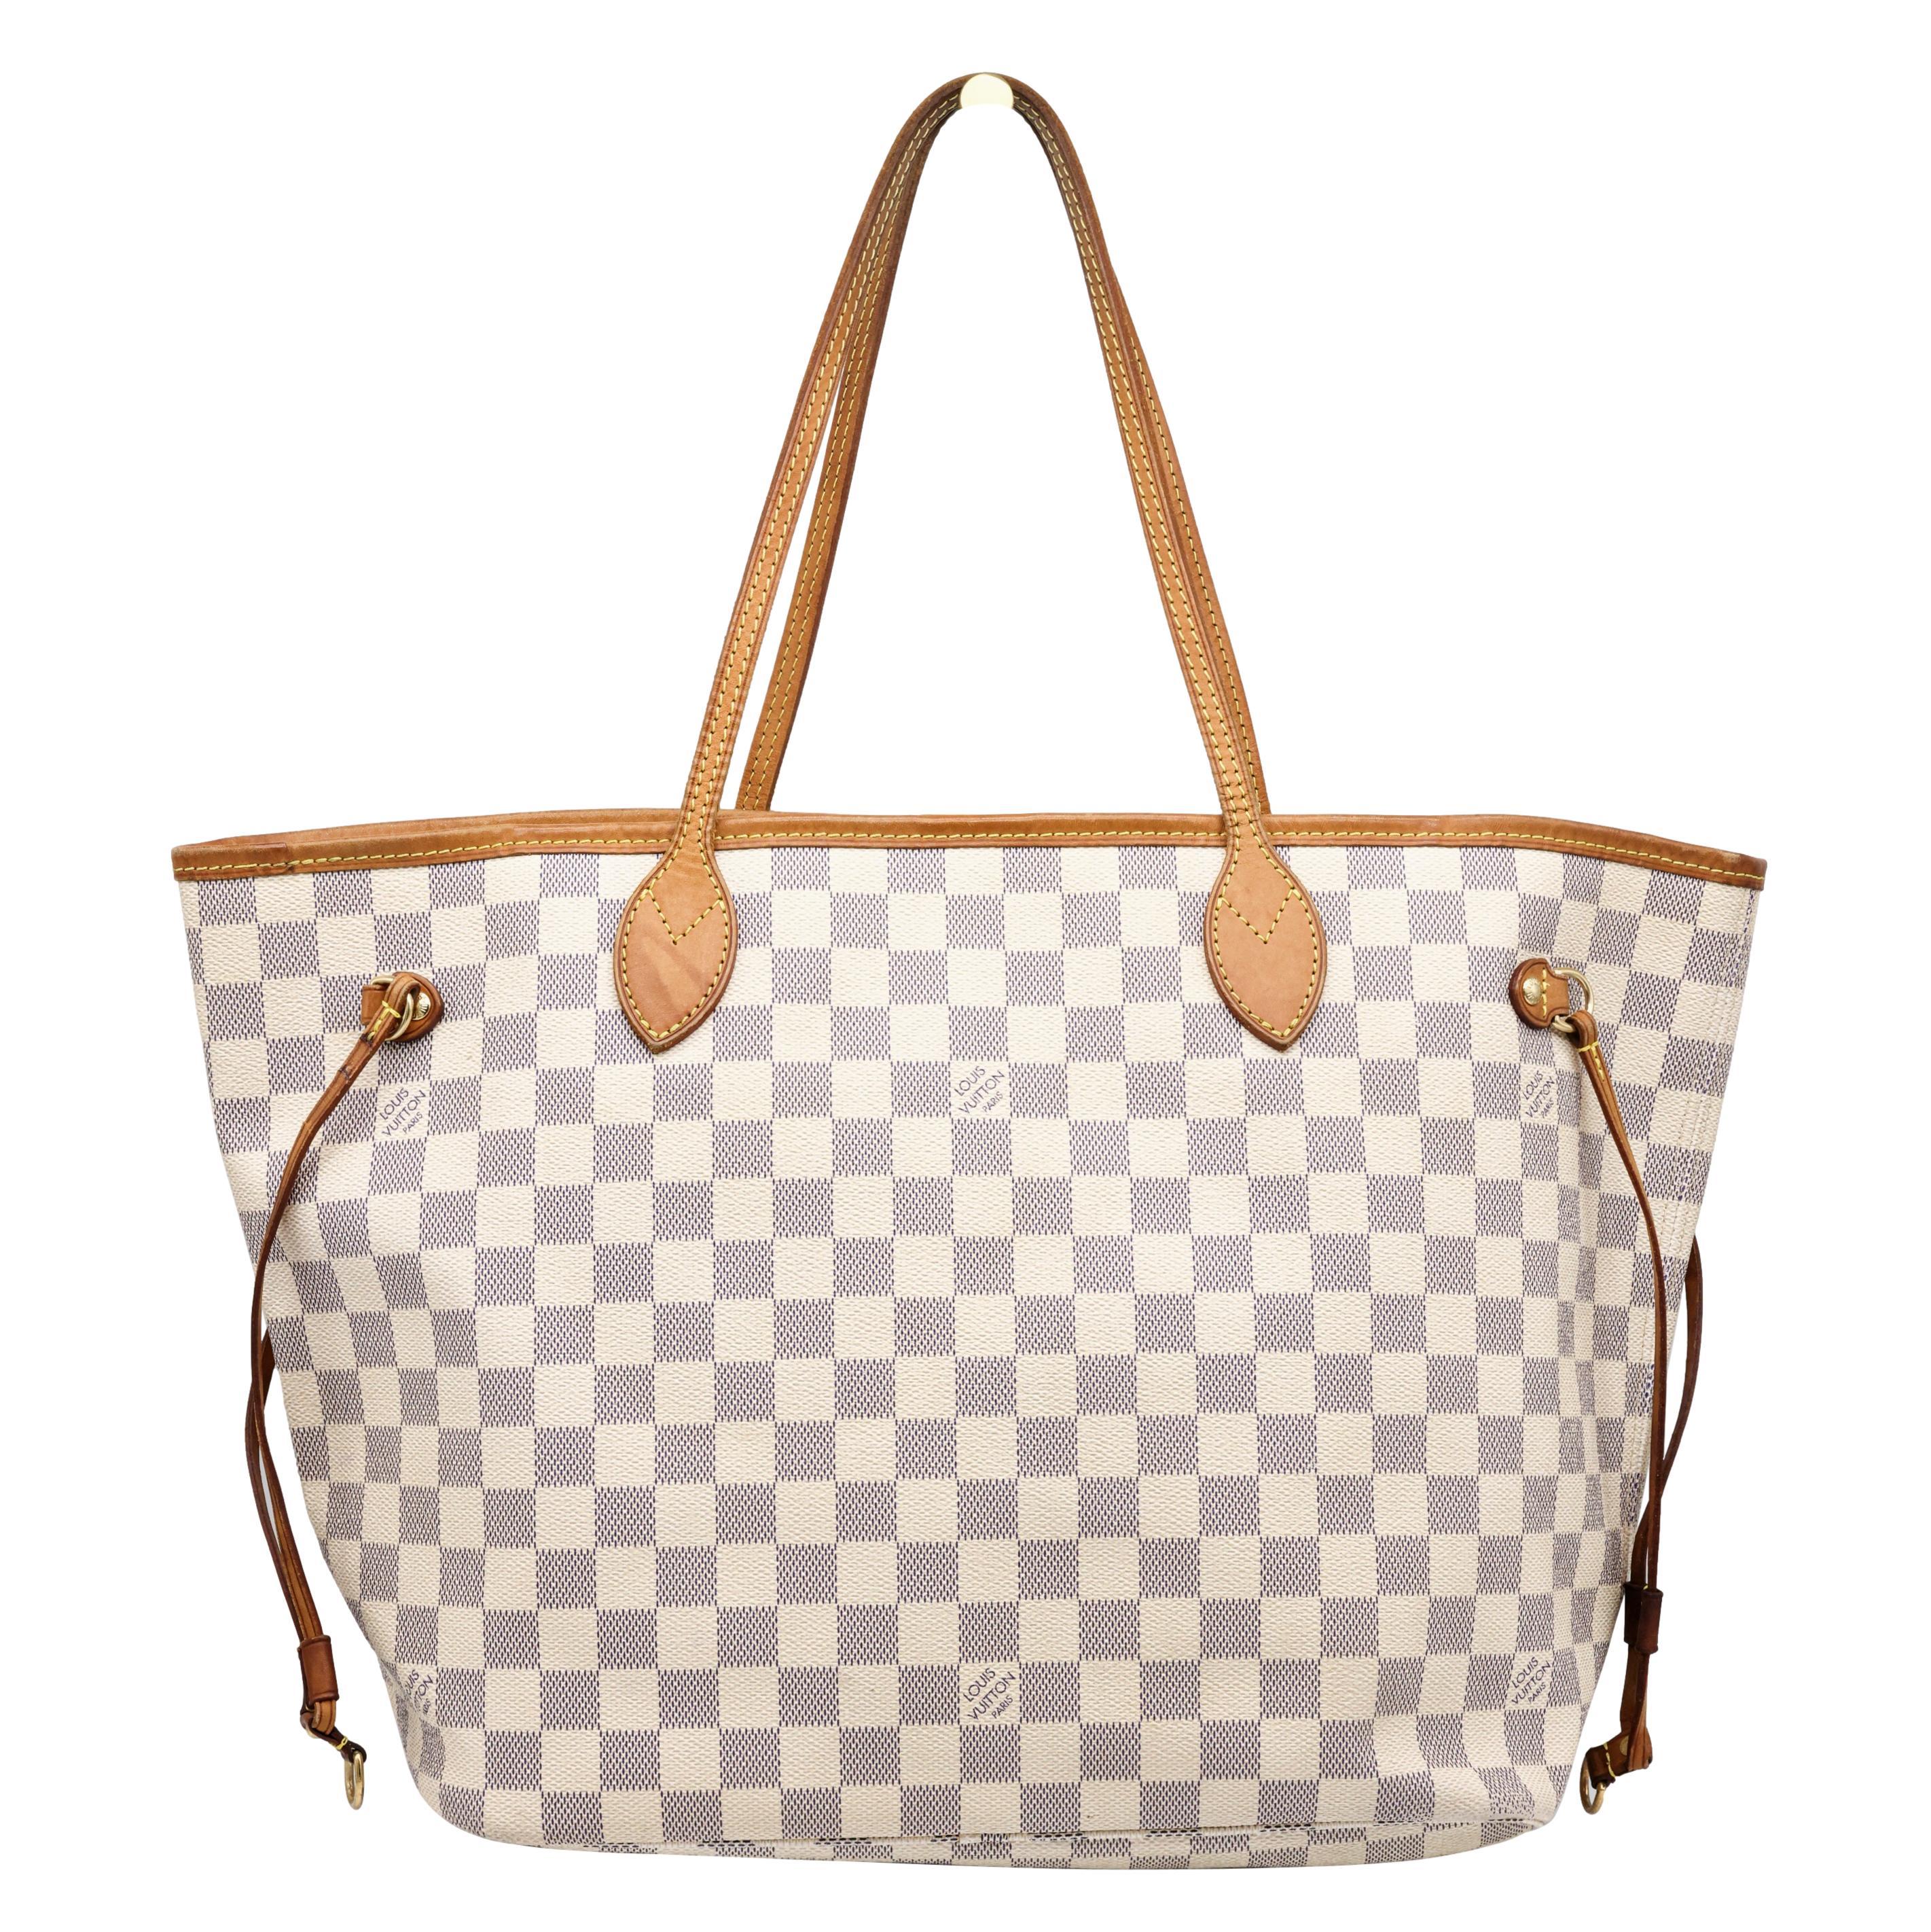 Louis Vuitton Damier Azure Neverfull Top Handle Tote Bag, France 2010. The iconic 